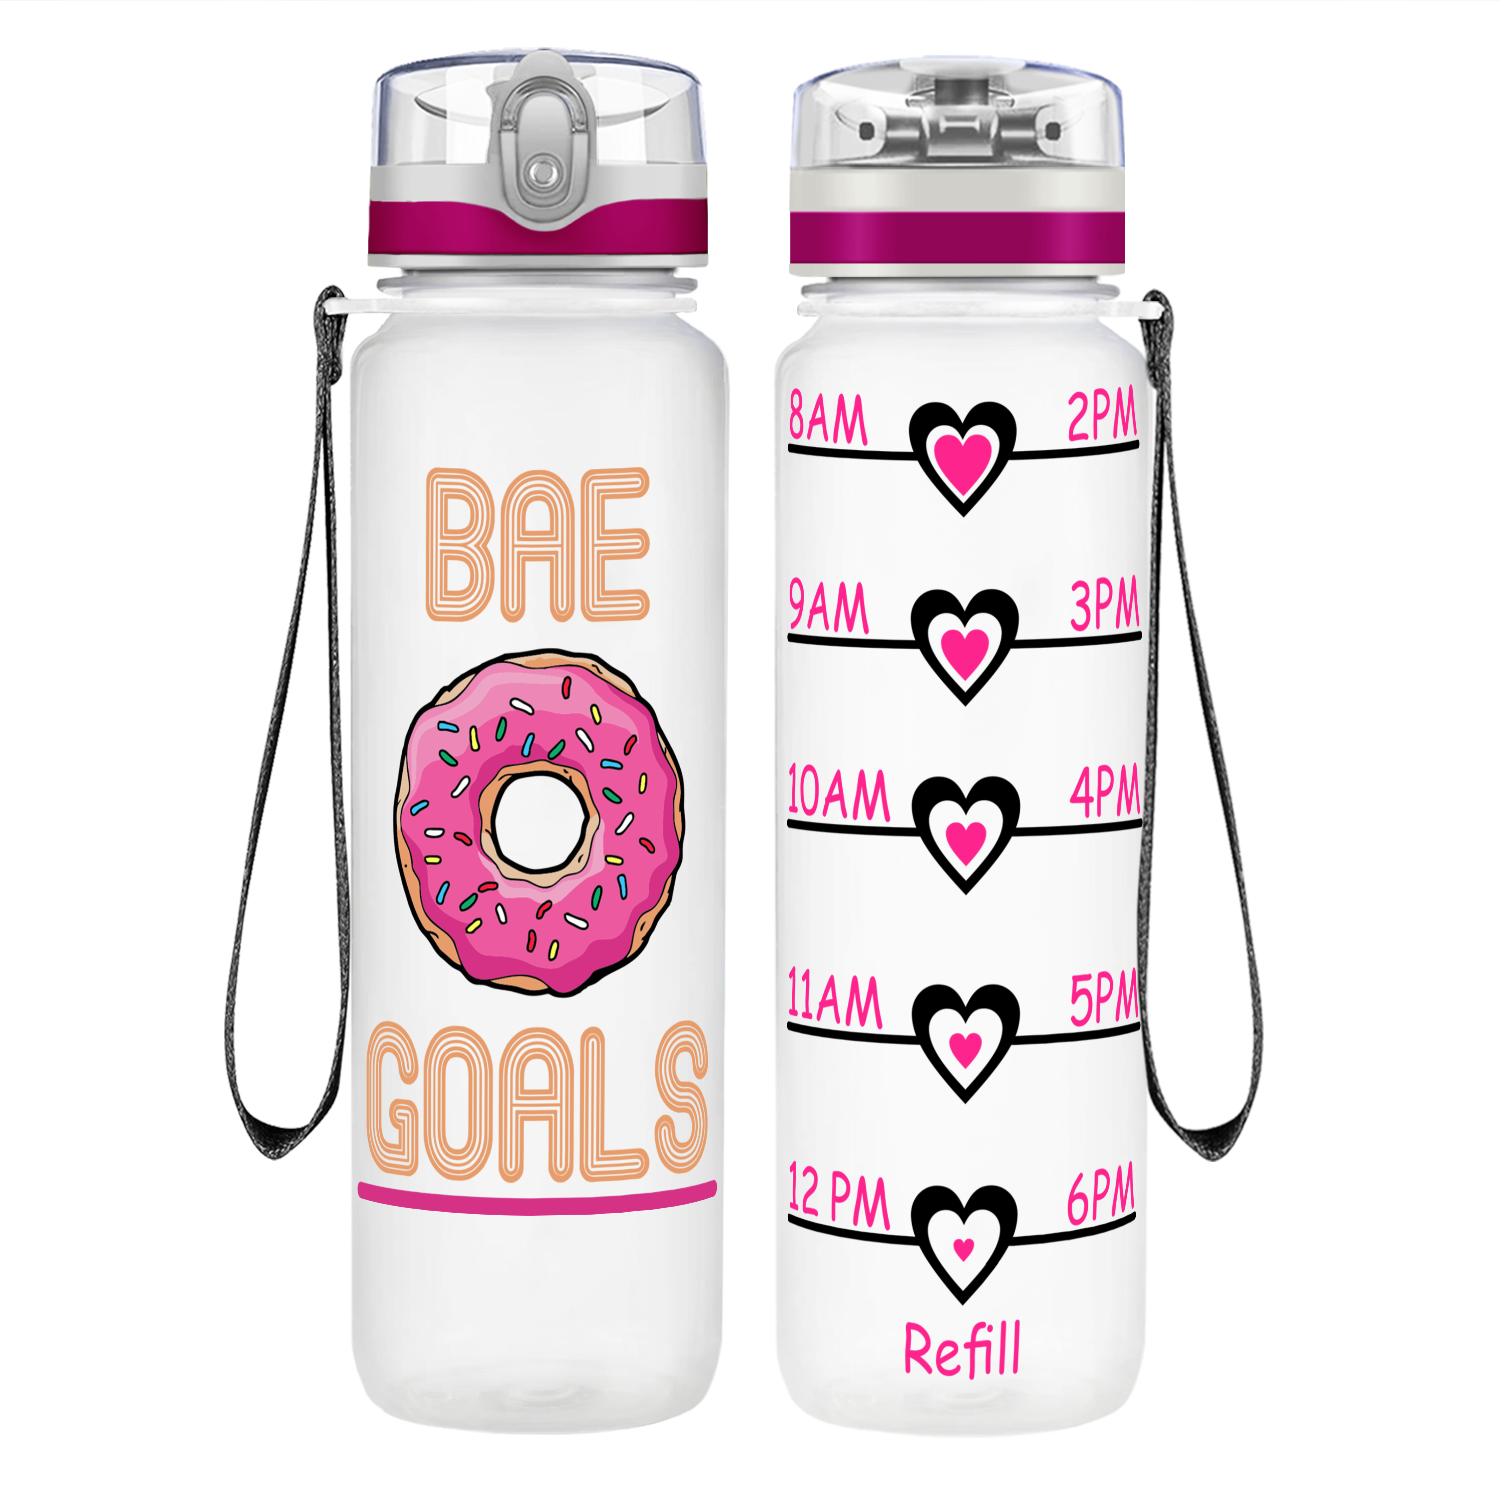 Bae Goals Donuts on 32 oz Motivational Tracking Water Bottle